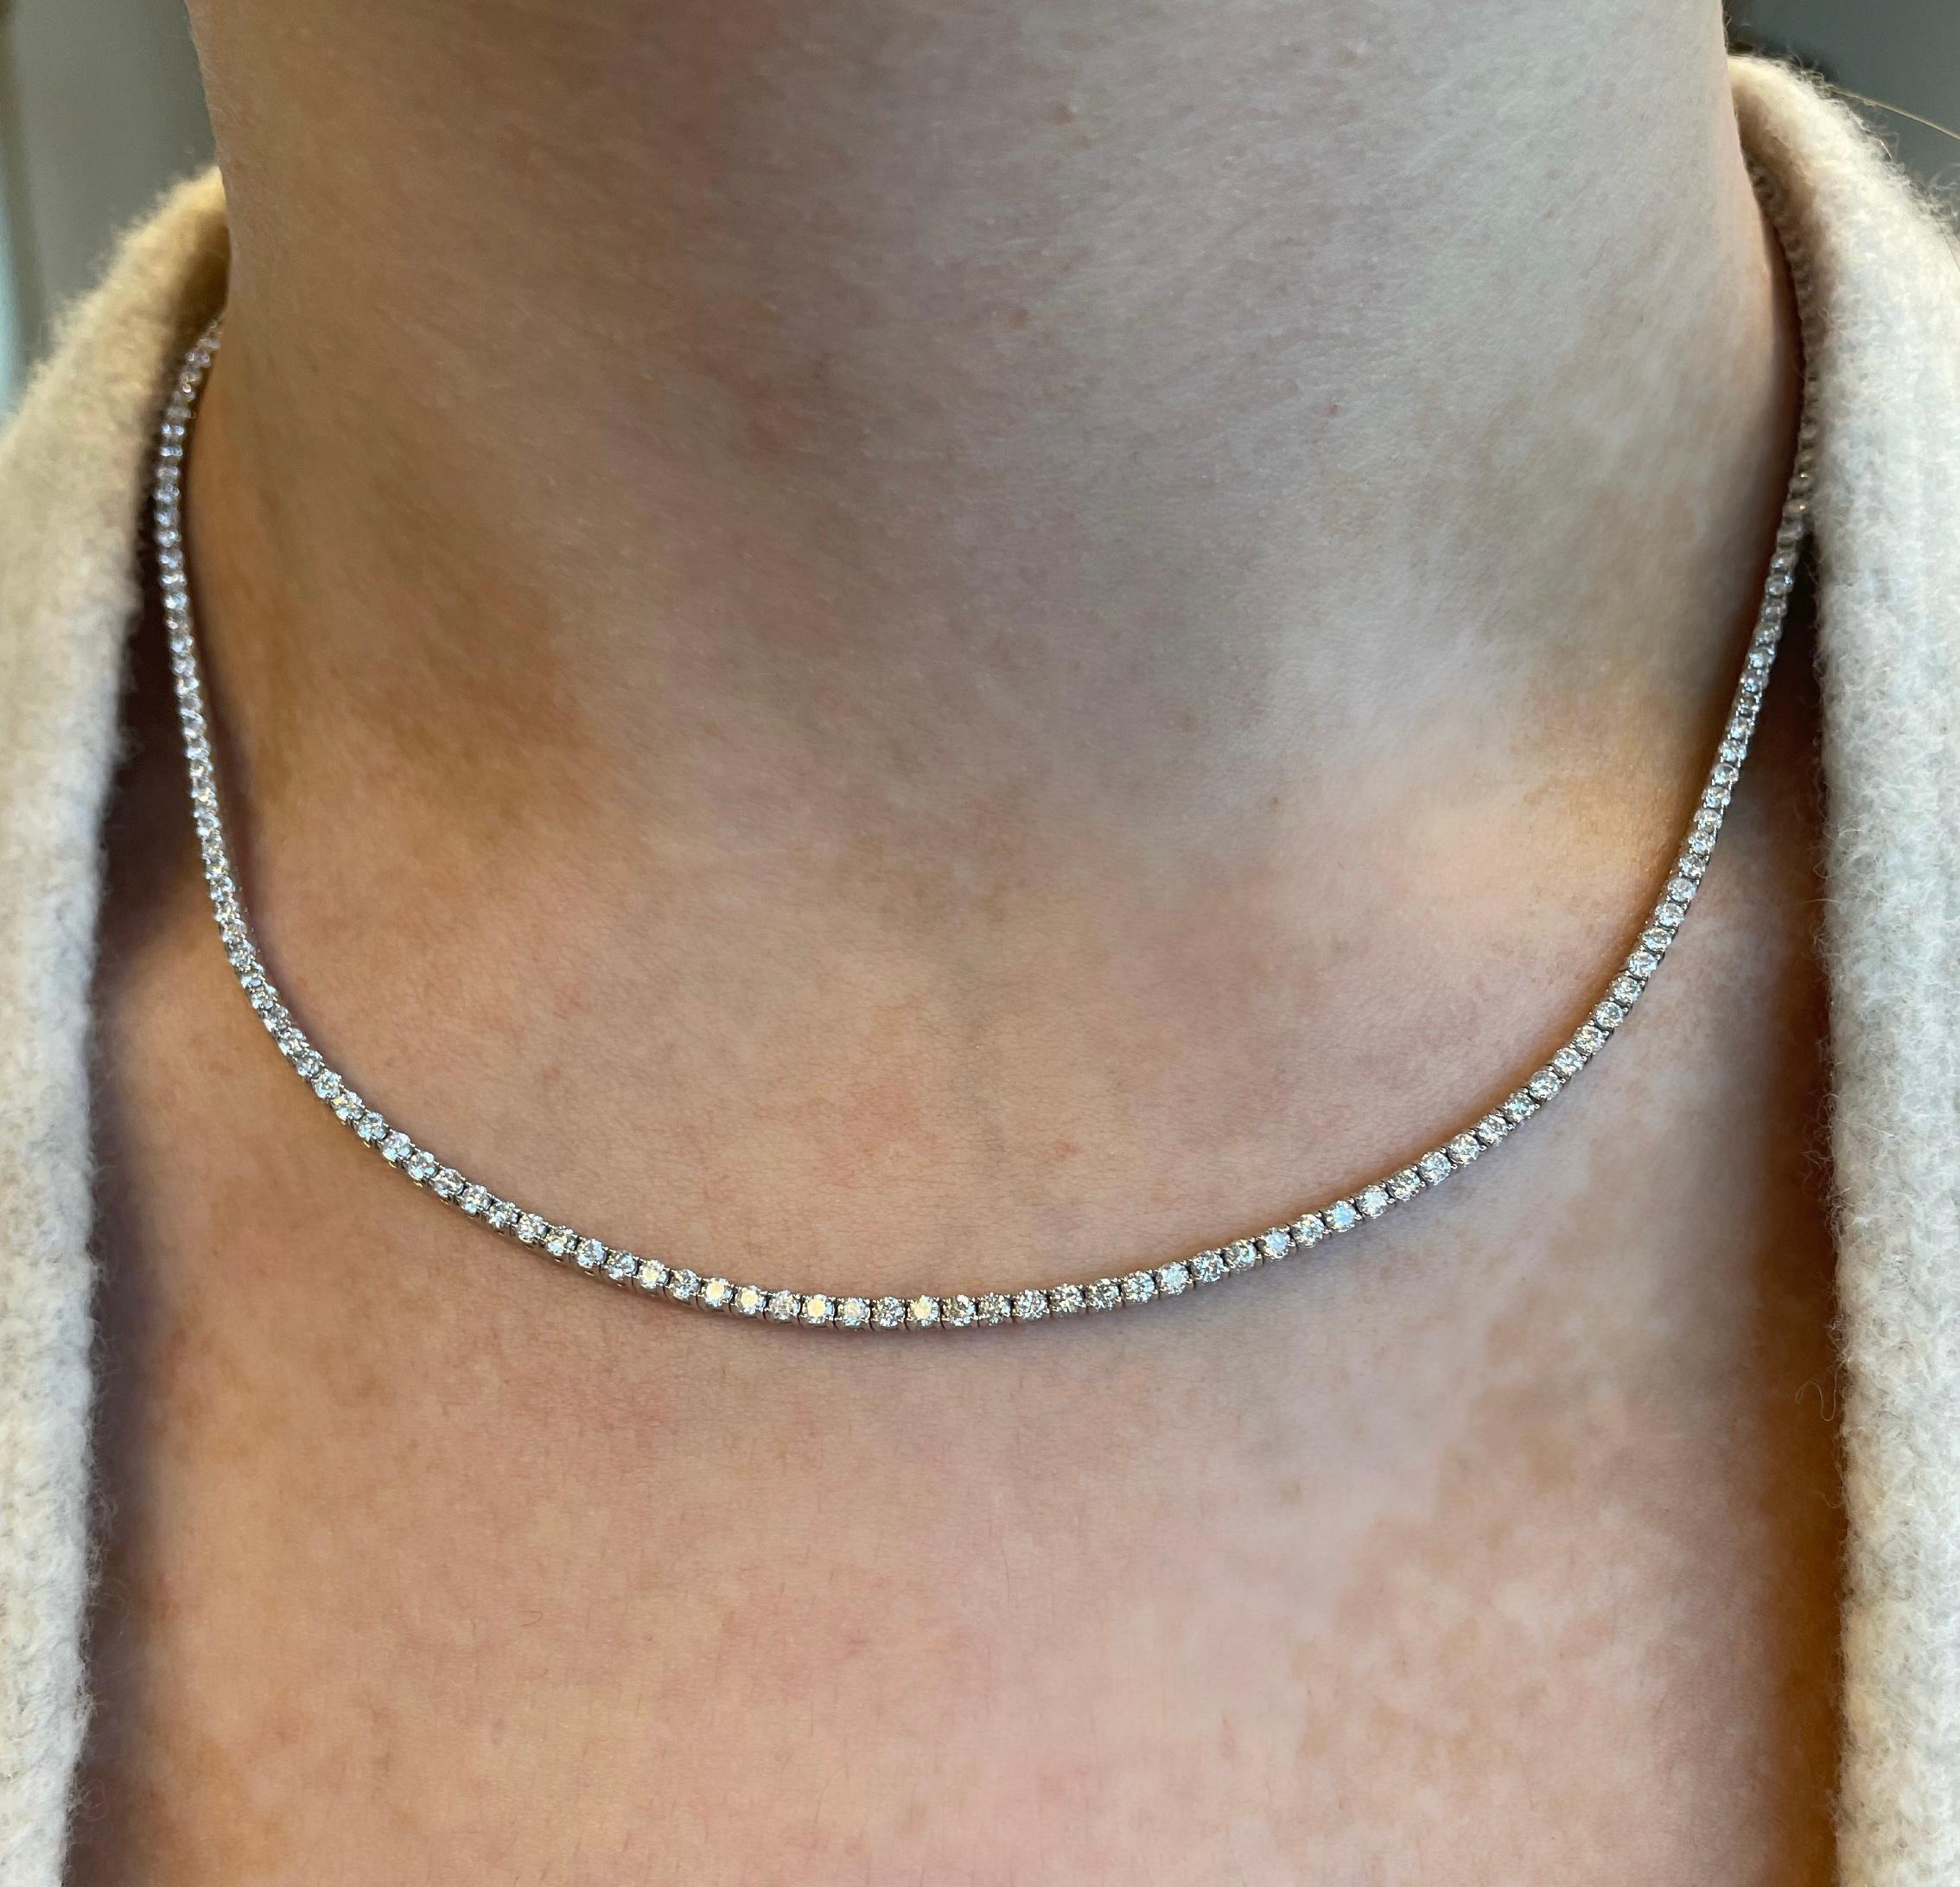 Beautiful and classic diamond tennis necklace. By Alexander Beverly Hills.
5.09 carats of round brilliant diamonds, approximately G/H color and SI clarity. 18k white gold, 18.90 grams, 17in.
Accommodated with an up to date appraisal by a GIA G.G.,